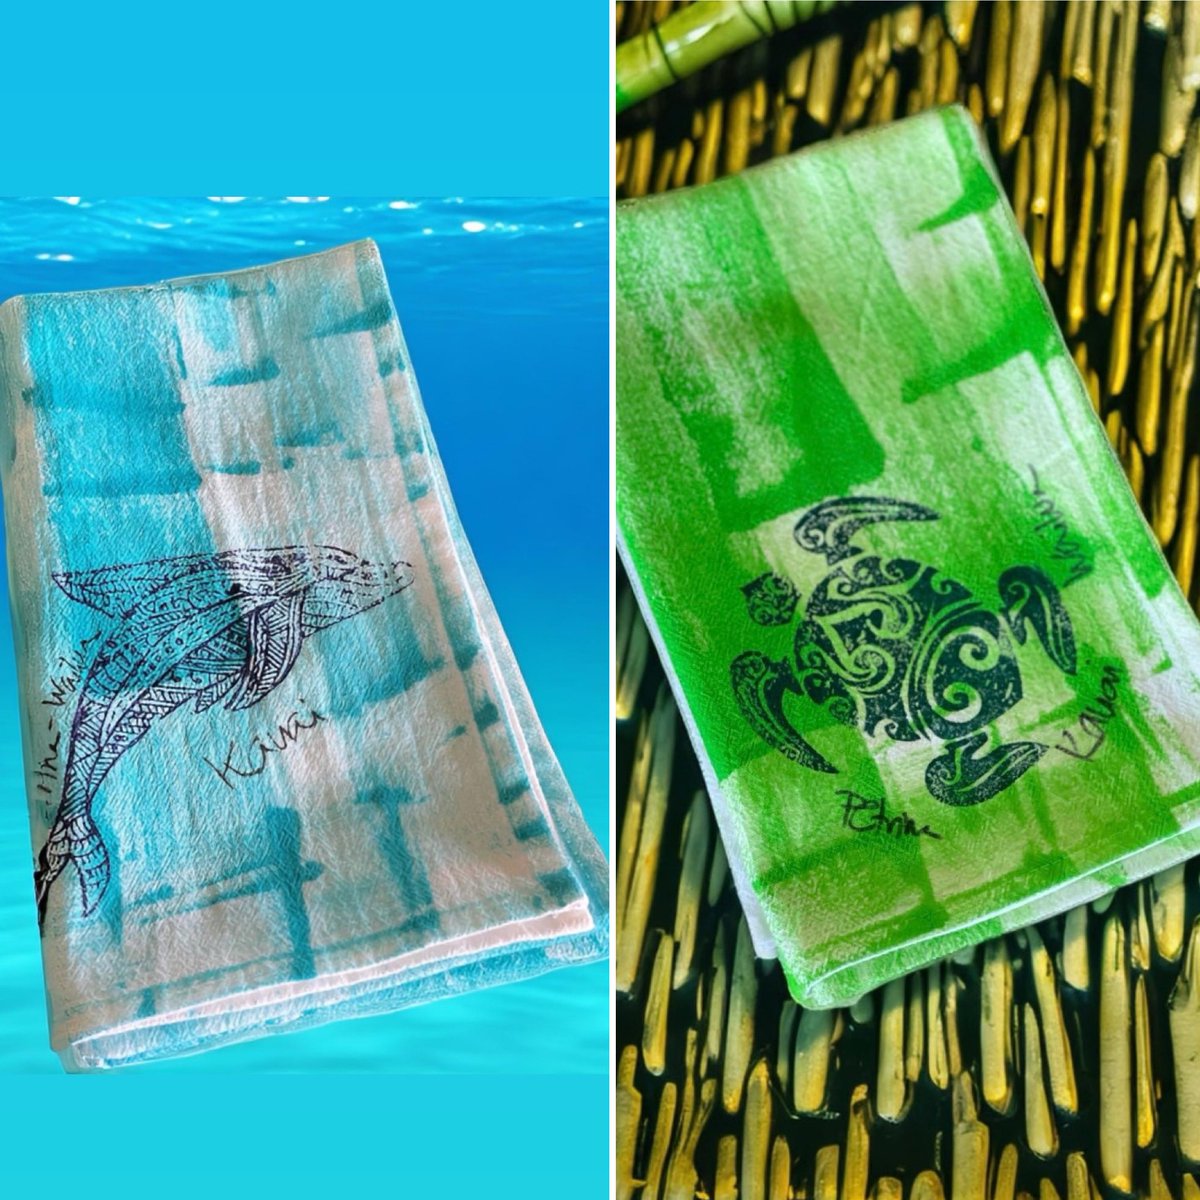 Hawaii Hand Painted Towels Best Selling Gift Kauai made gift Hawaii Decor Cotton Towels Flour Sack Towels Mothers Day etsy.me/44nN116 via @Etsy #beachvibes #MothersDayGifts #etsyshop #MondayMotivation #dolphin #TURTLE #GoodMorningEveryone